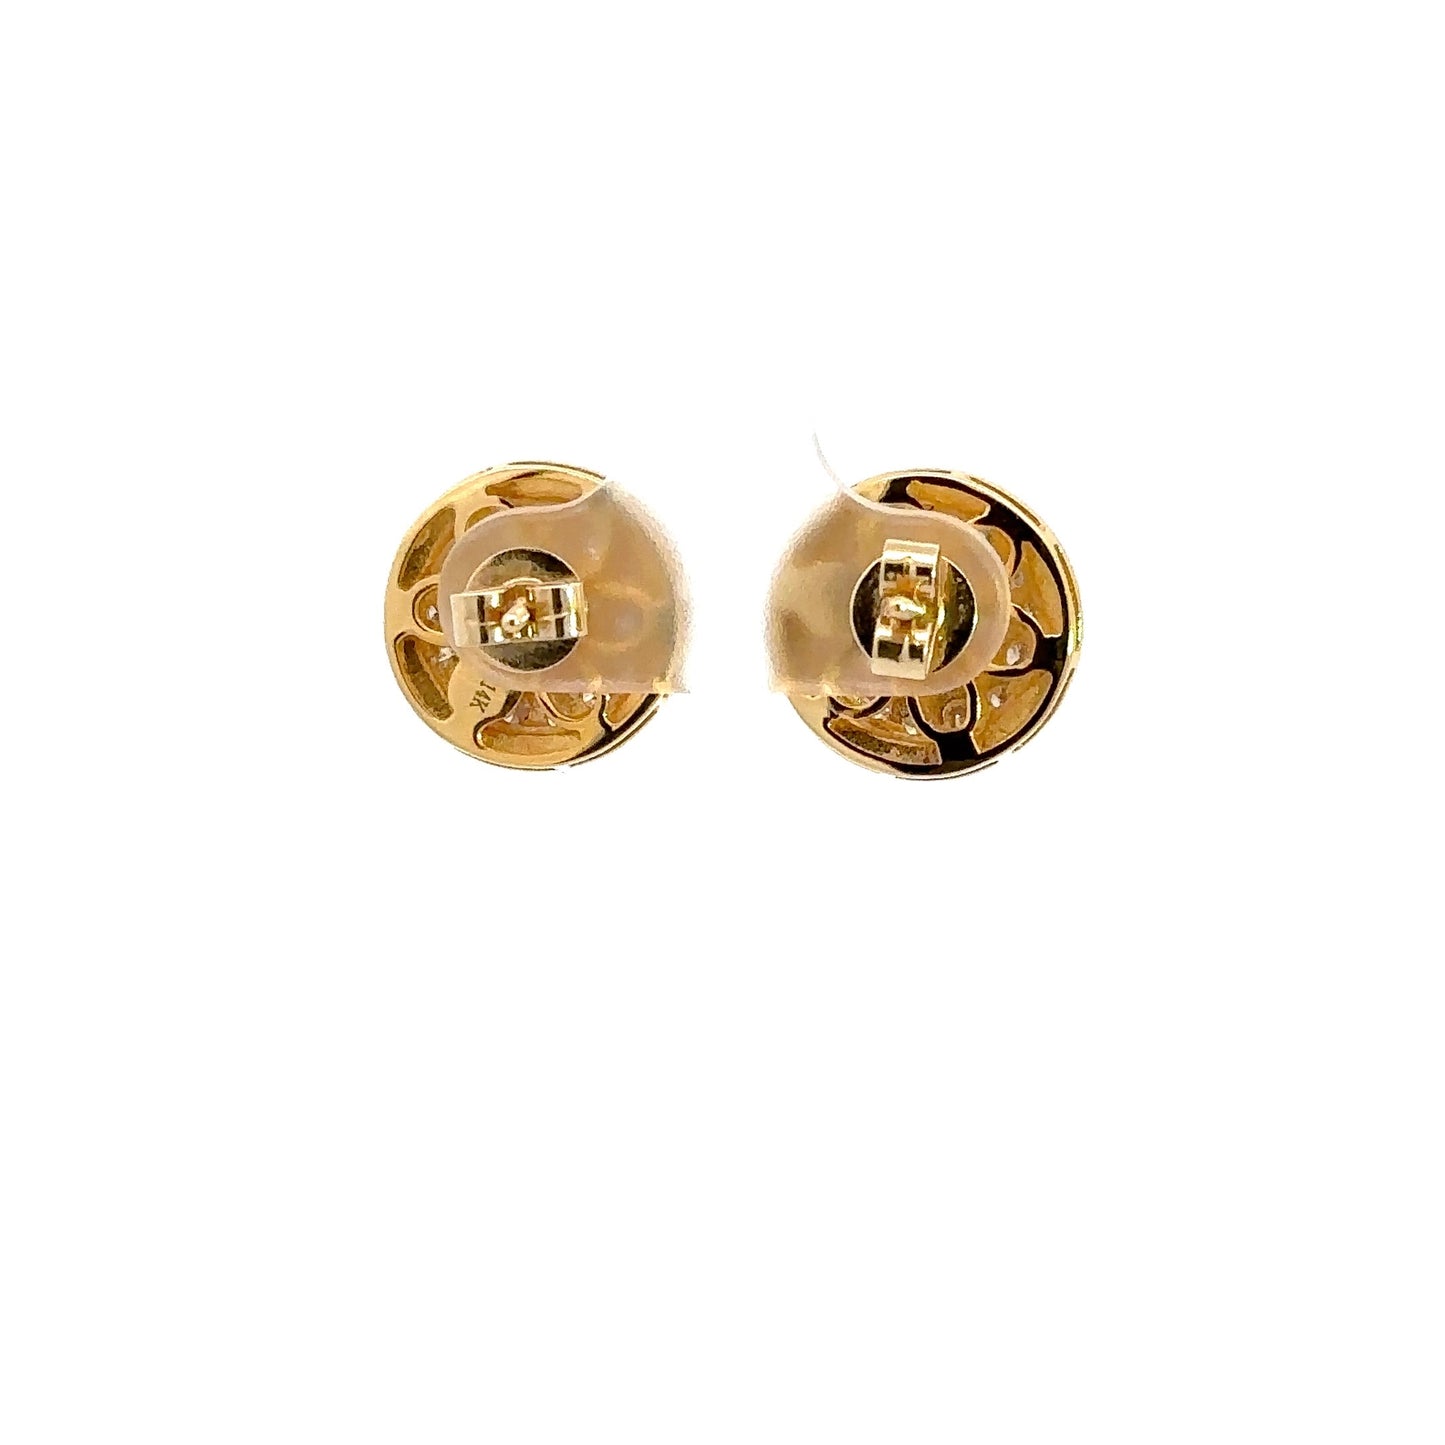 back of earrings with 14K stamp